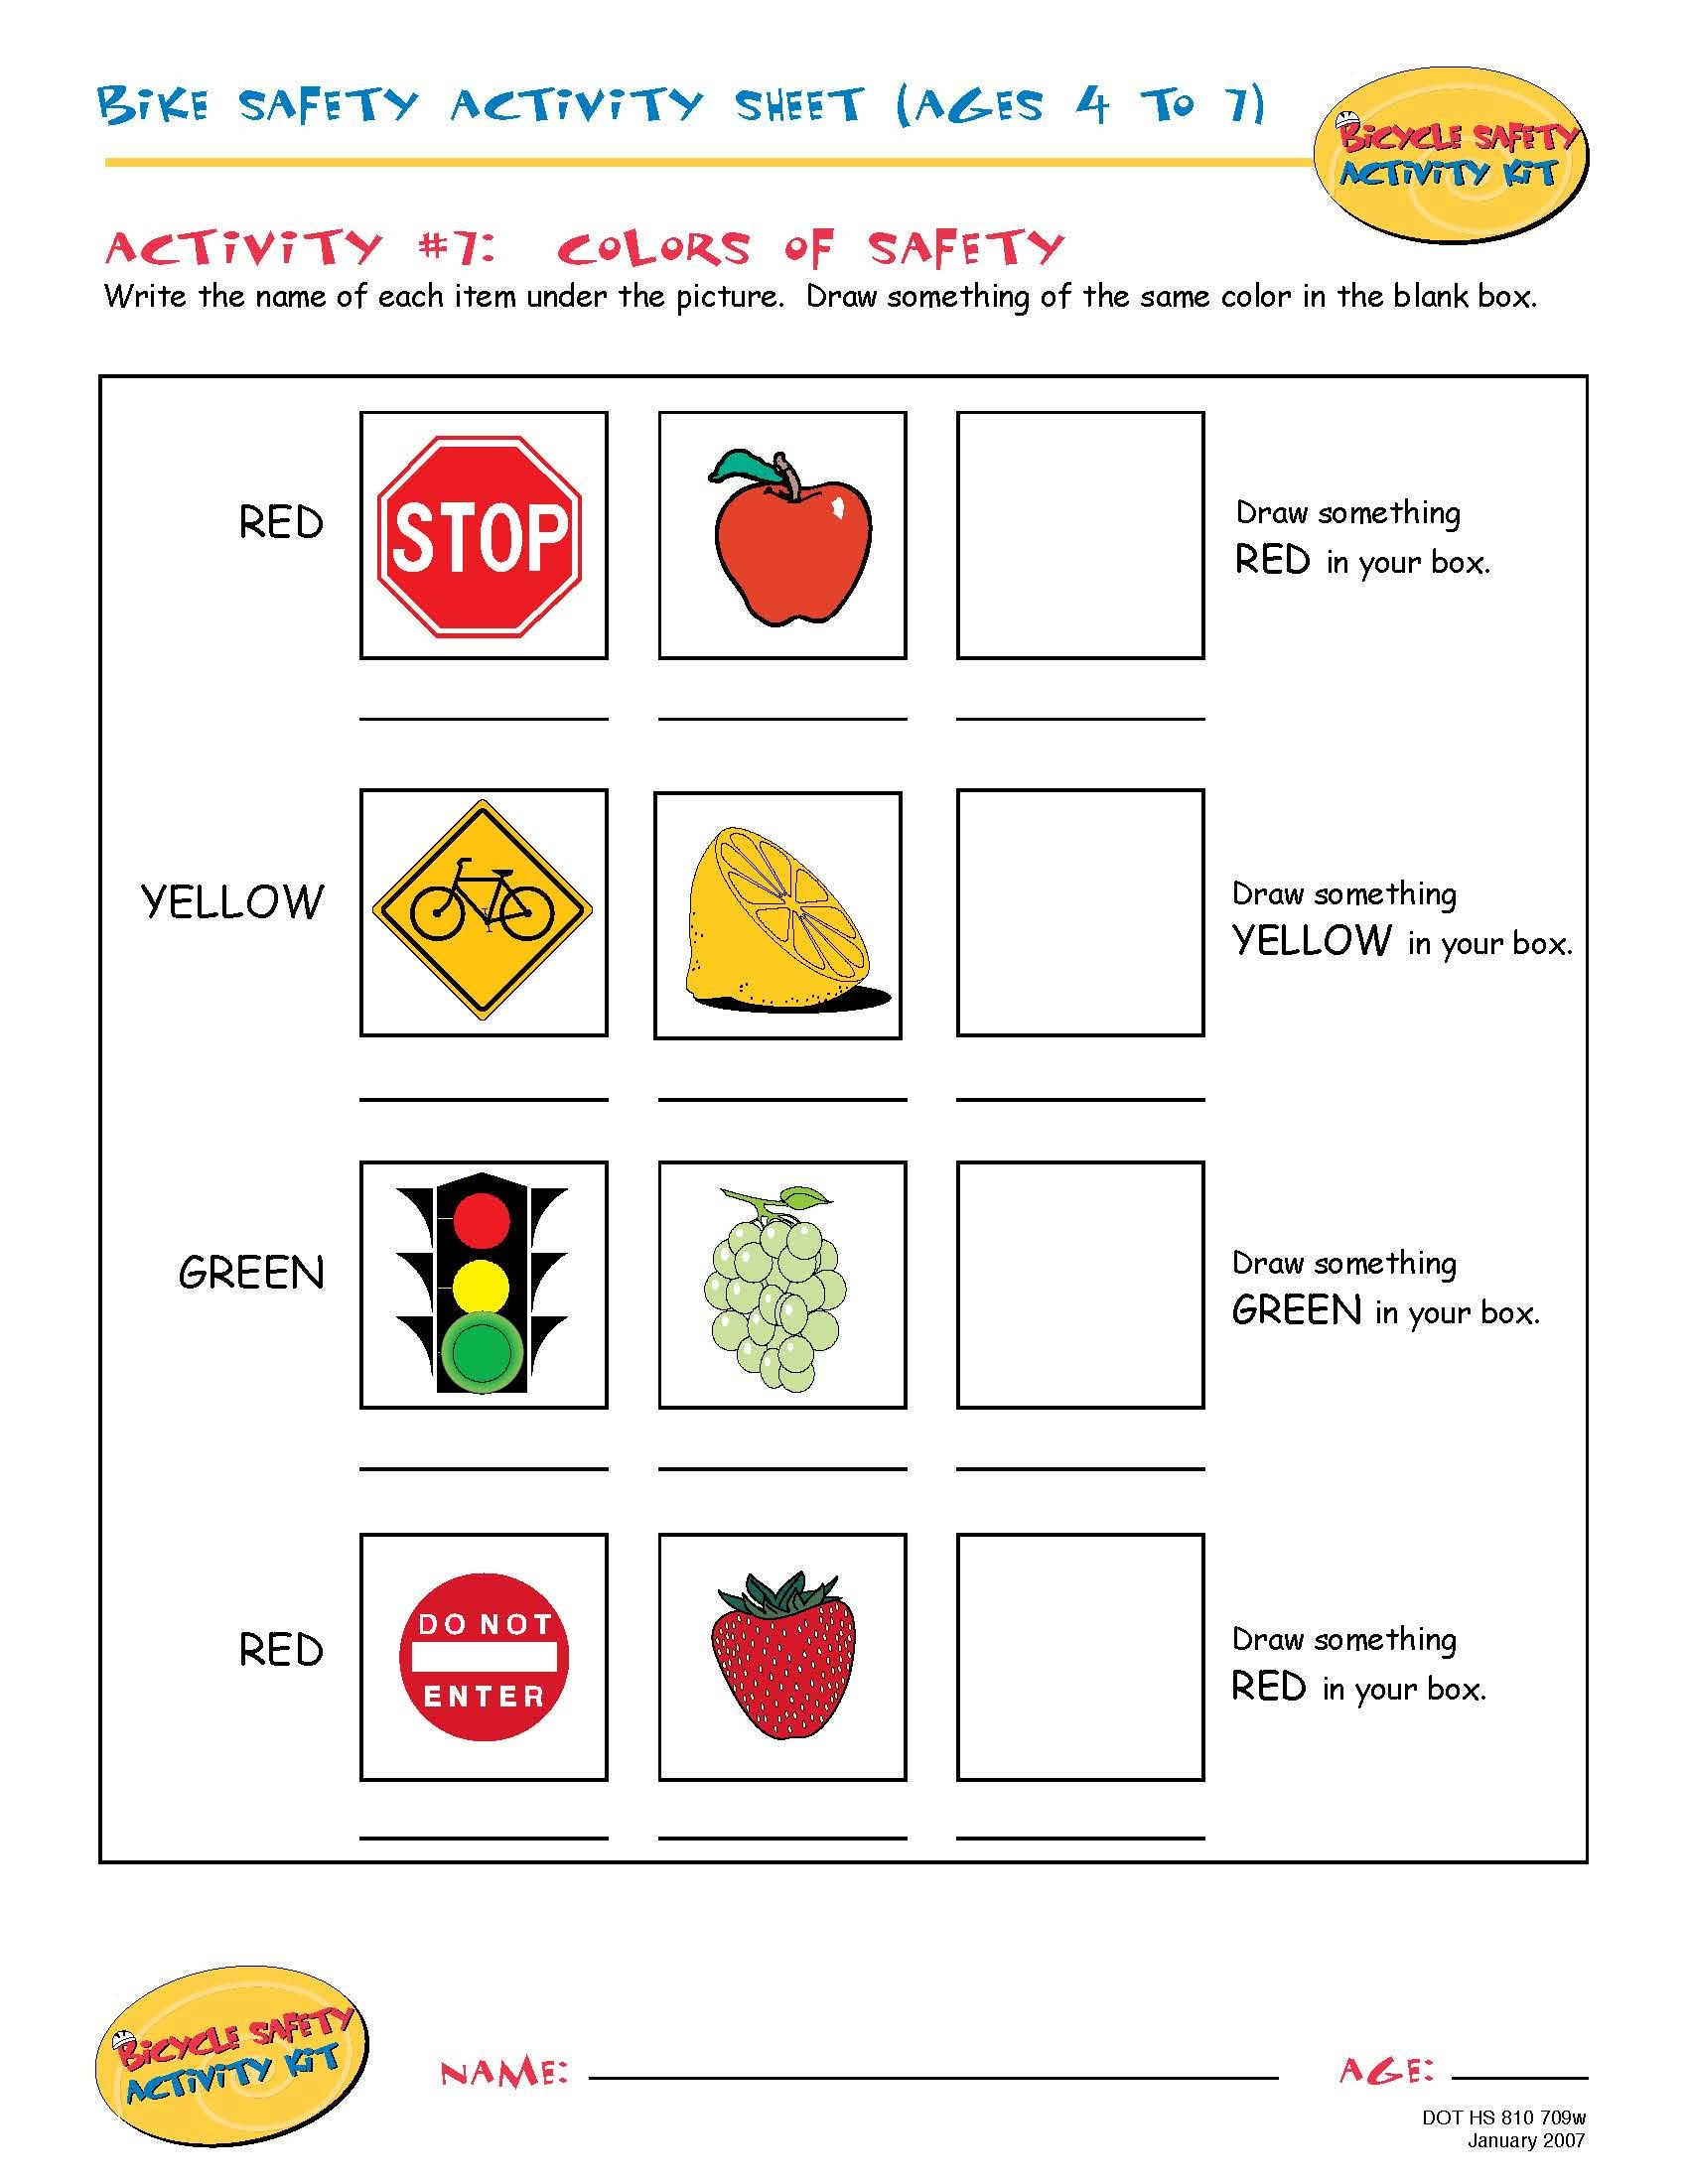 Bike Safety Activity Sheet (Ages 4 To 7): Colors Of Safety